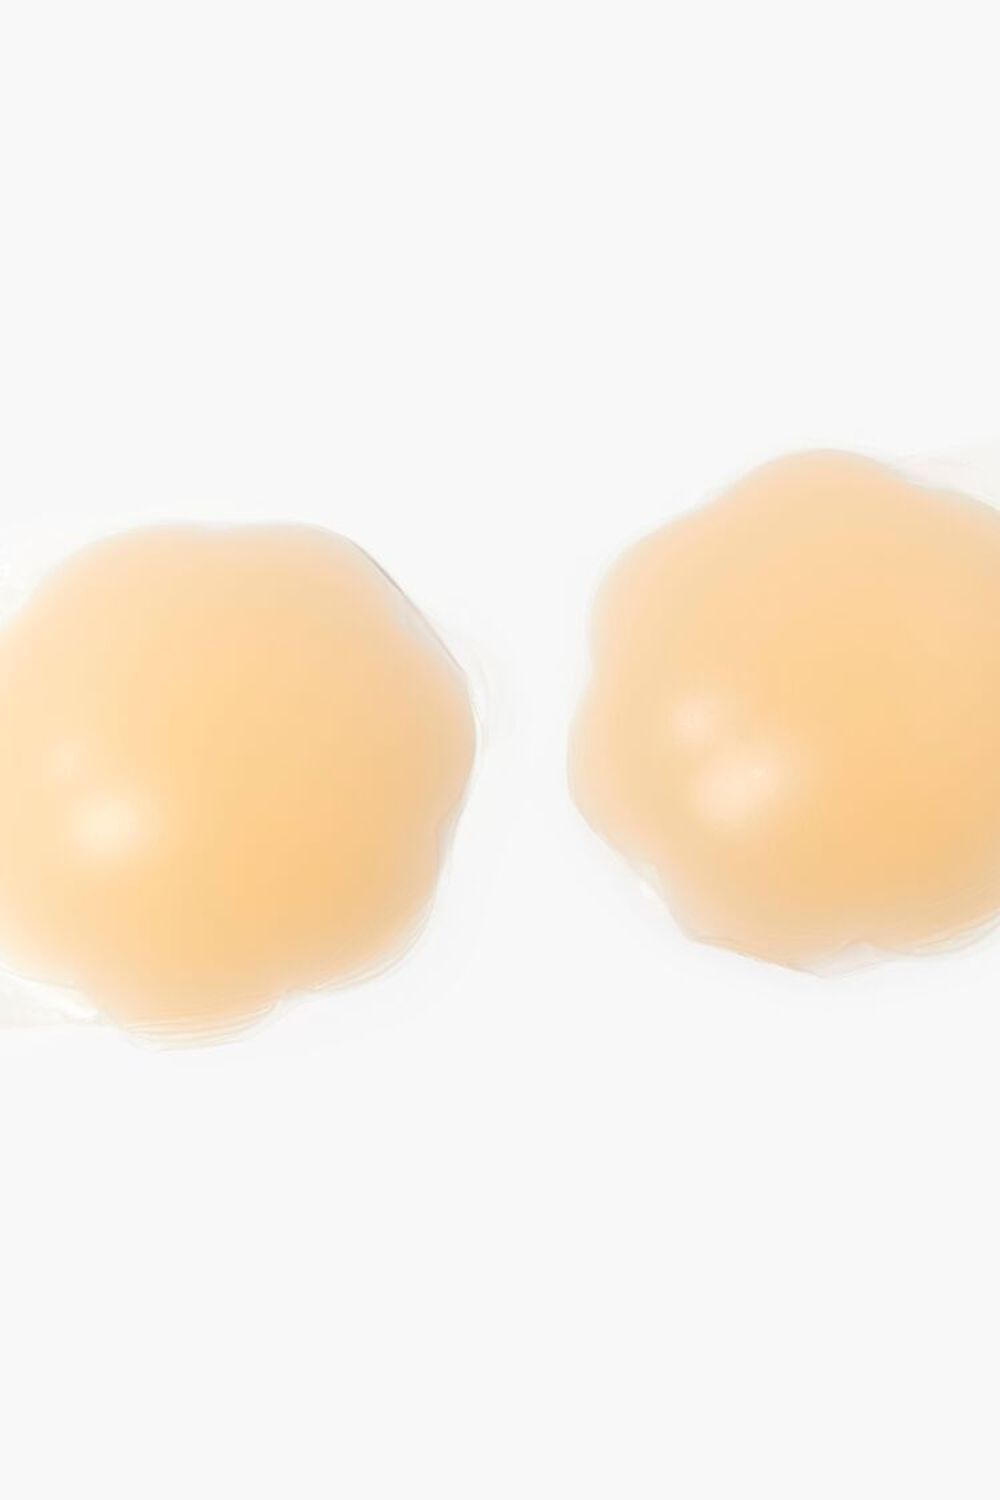 Silicone Breast Lift Nipple Covers